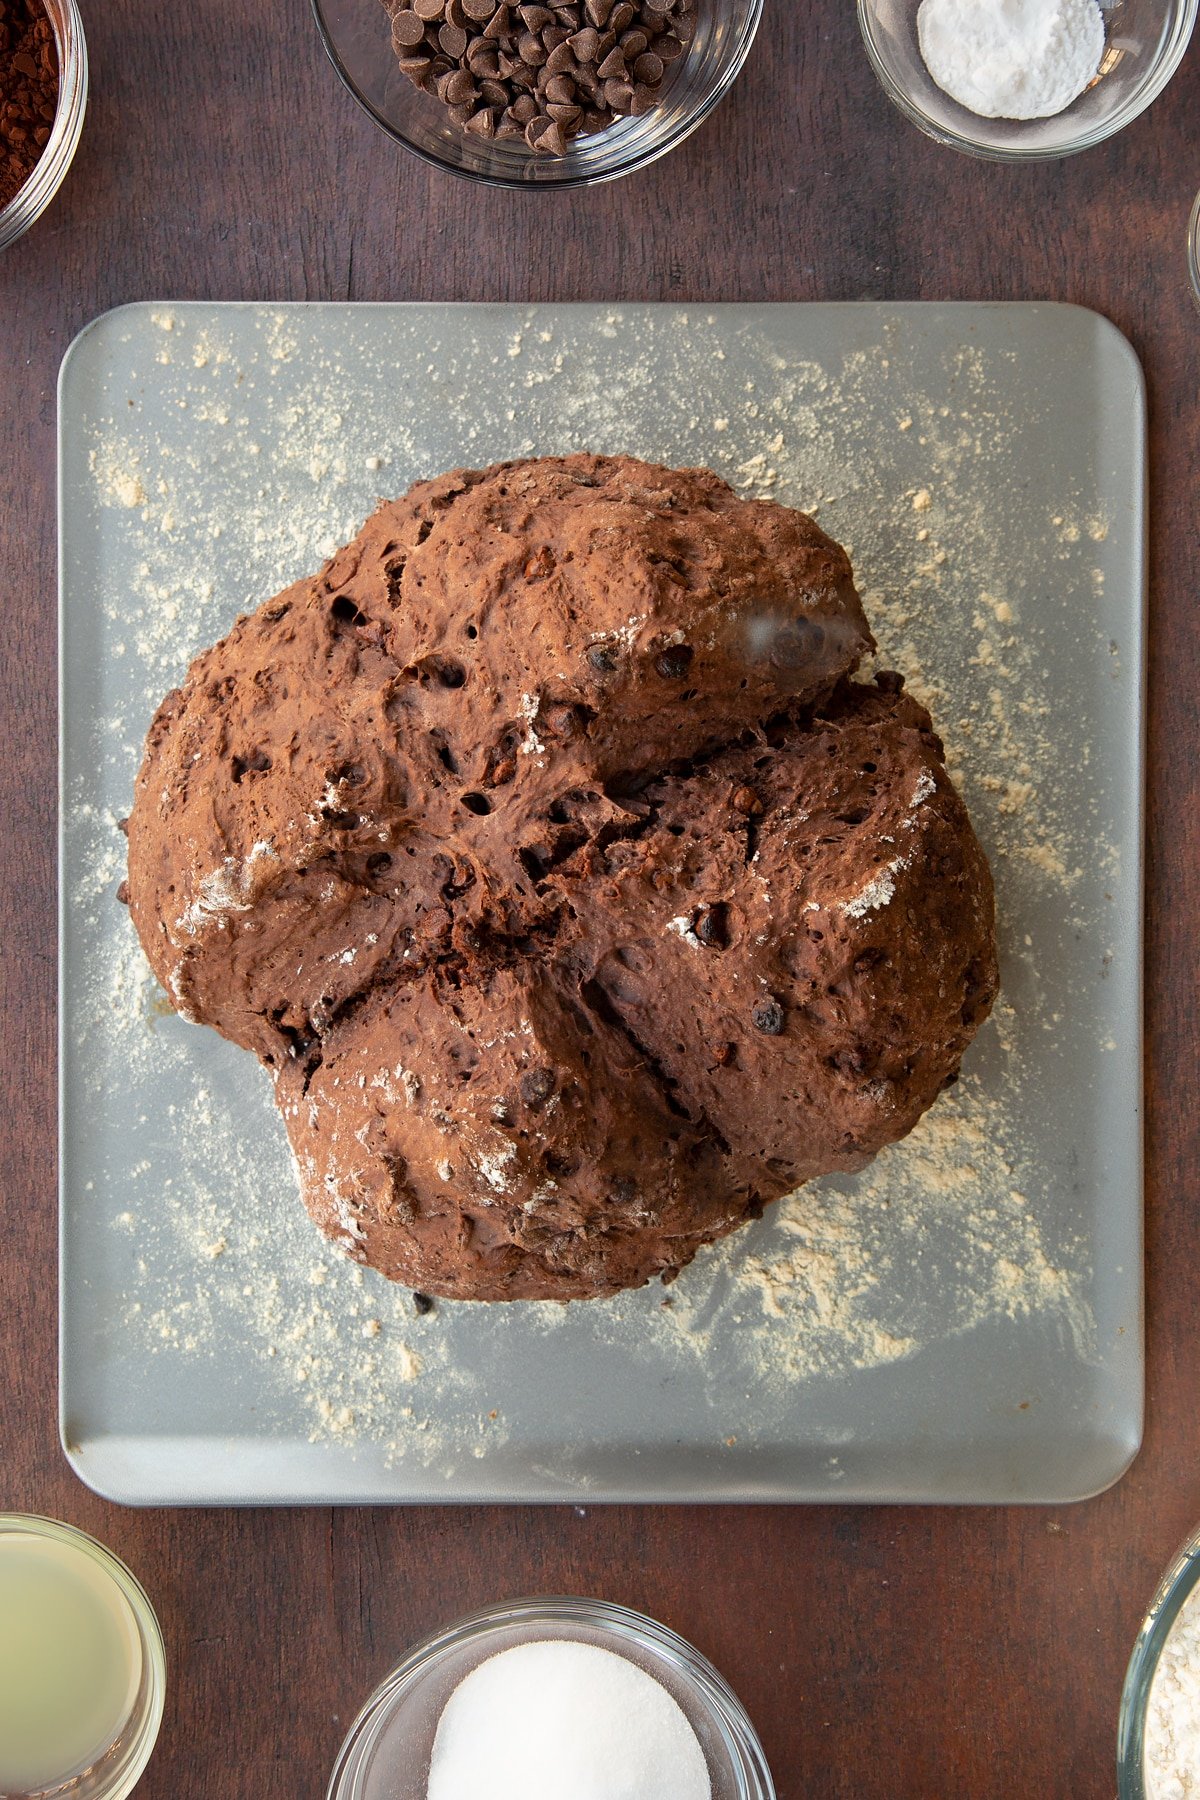 Overhead shot of the chocolate soda bread having been in the oven.